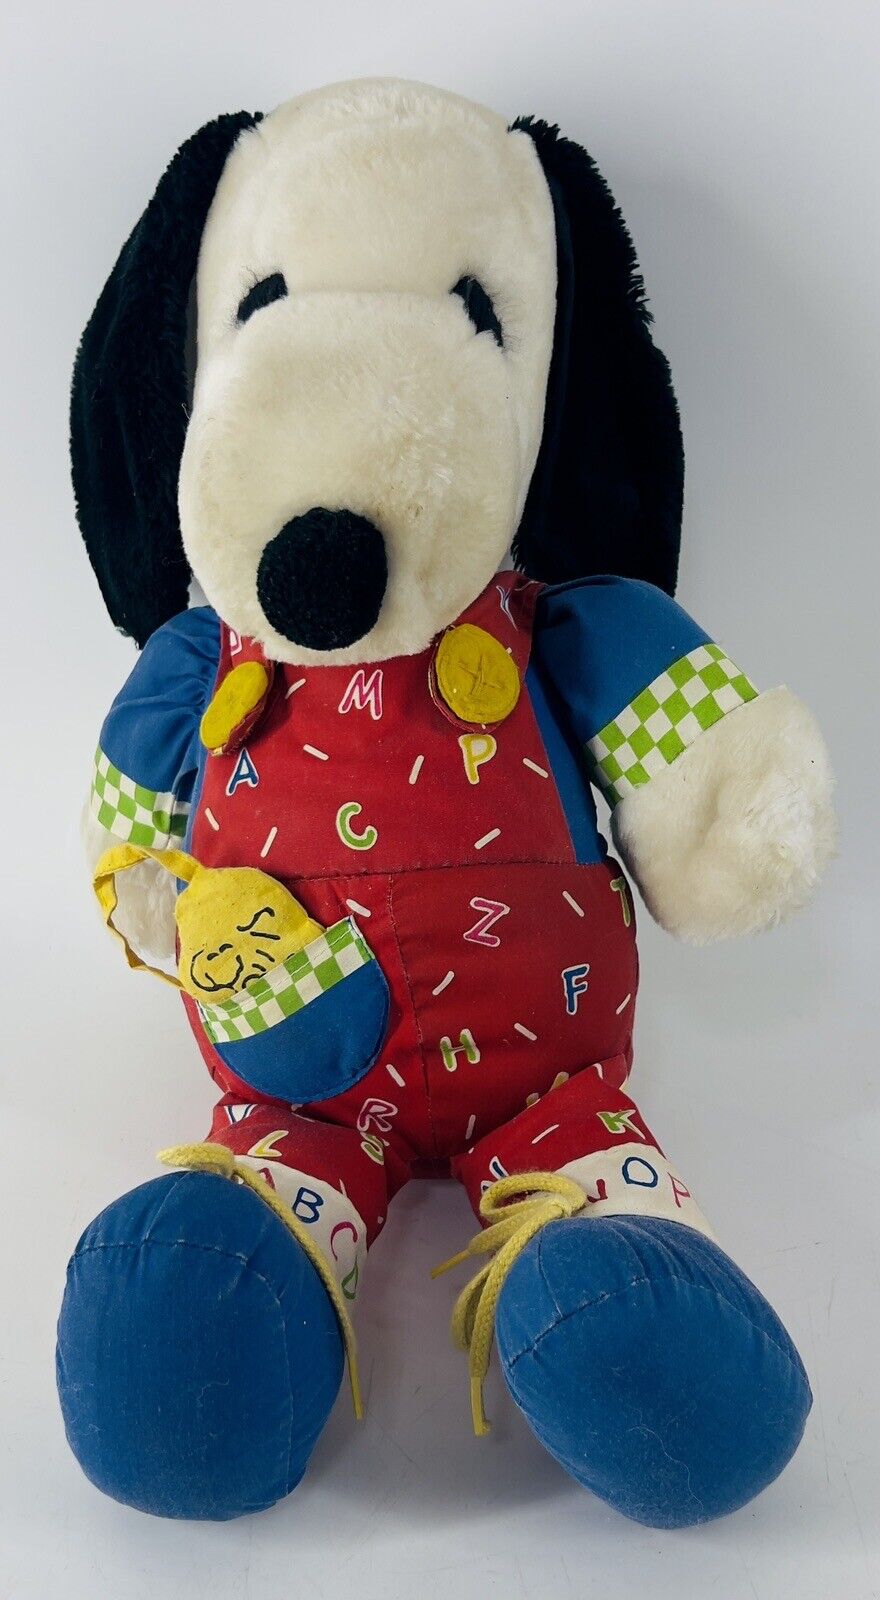 APPLAUSE - SNOOPY Learn & Play Plush W/zip, tie, buttons Vintage 1968 16”